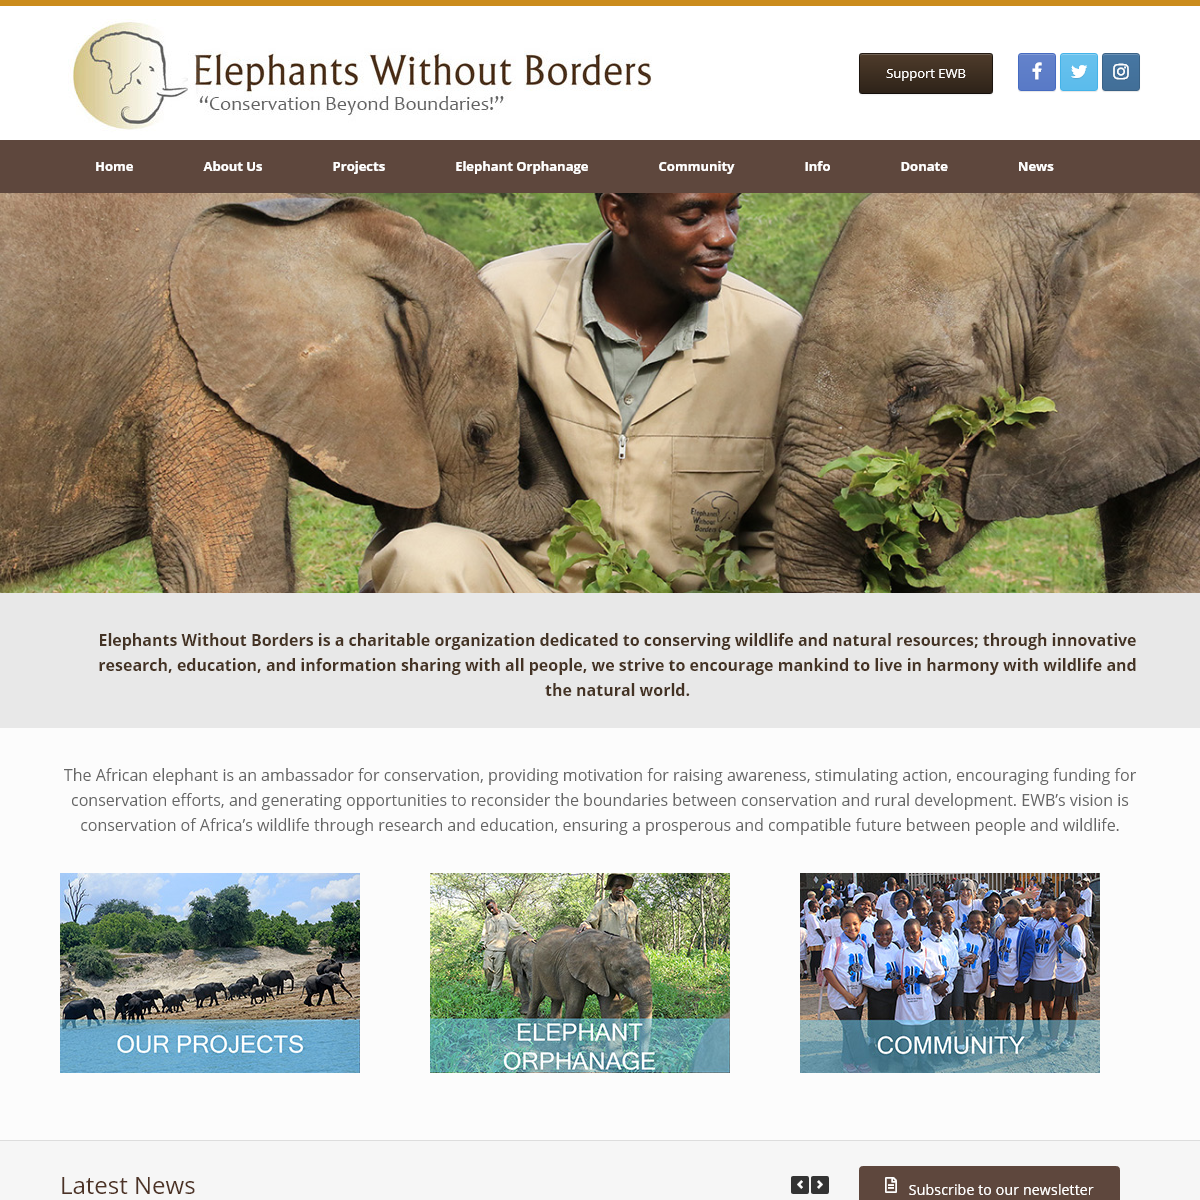 A complete backup of elephantswithoutborders.org